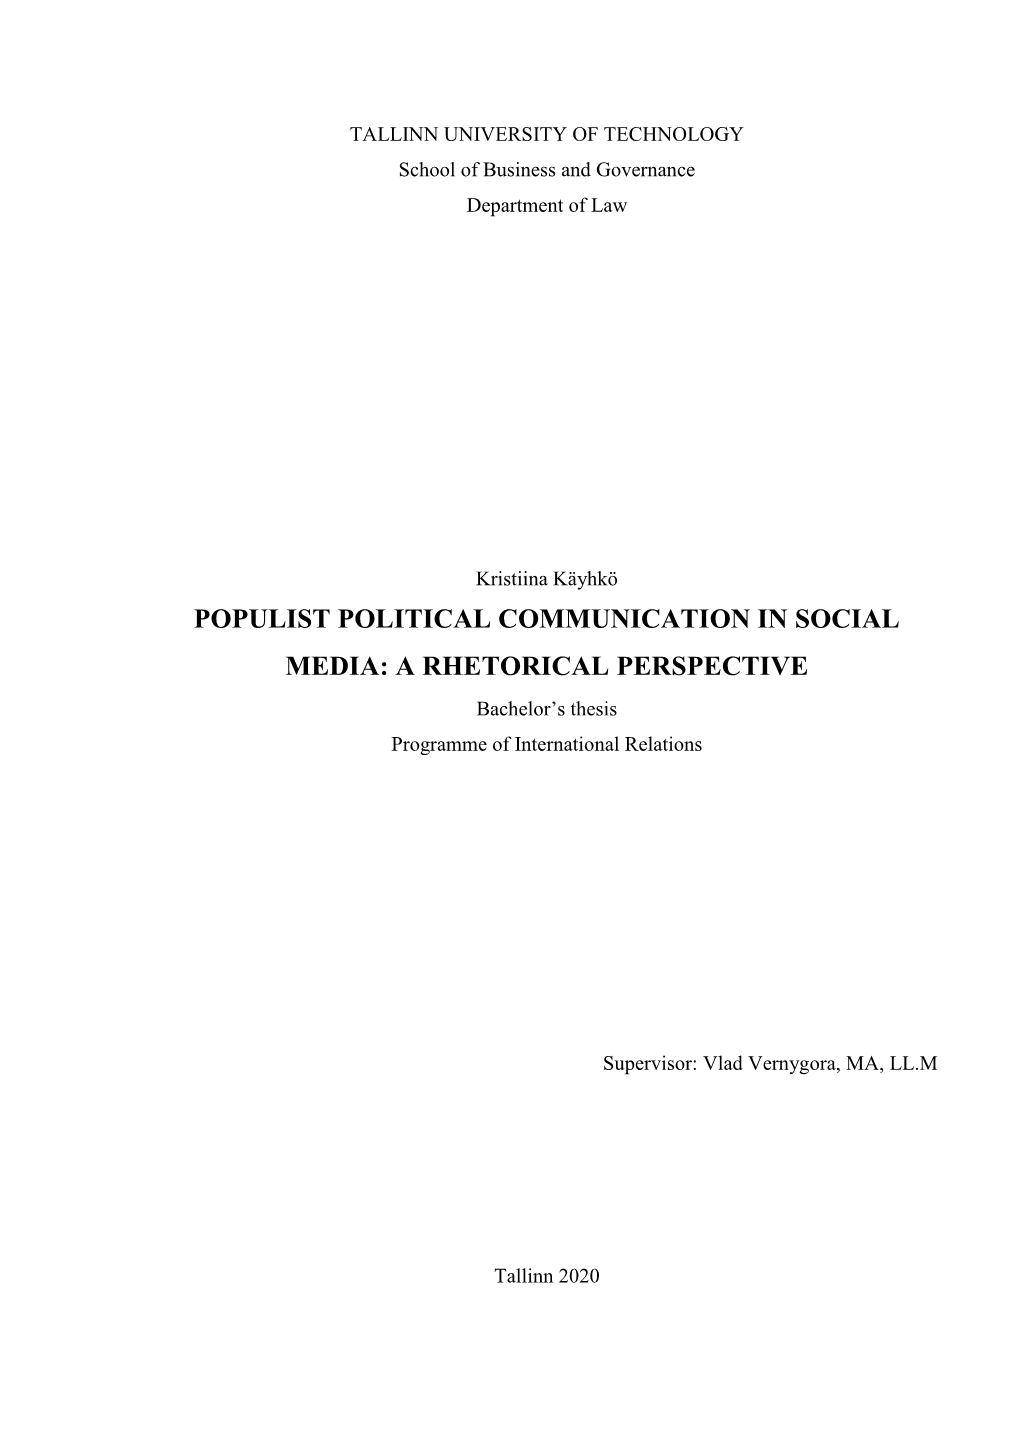 POPULIST POLITICAL COMMUNICATION in SOCIAL MEDIA: a RHETORICAL PERSPECTIVE Bachelor’S Thesis Programme of International Relations